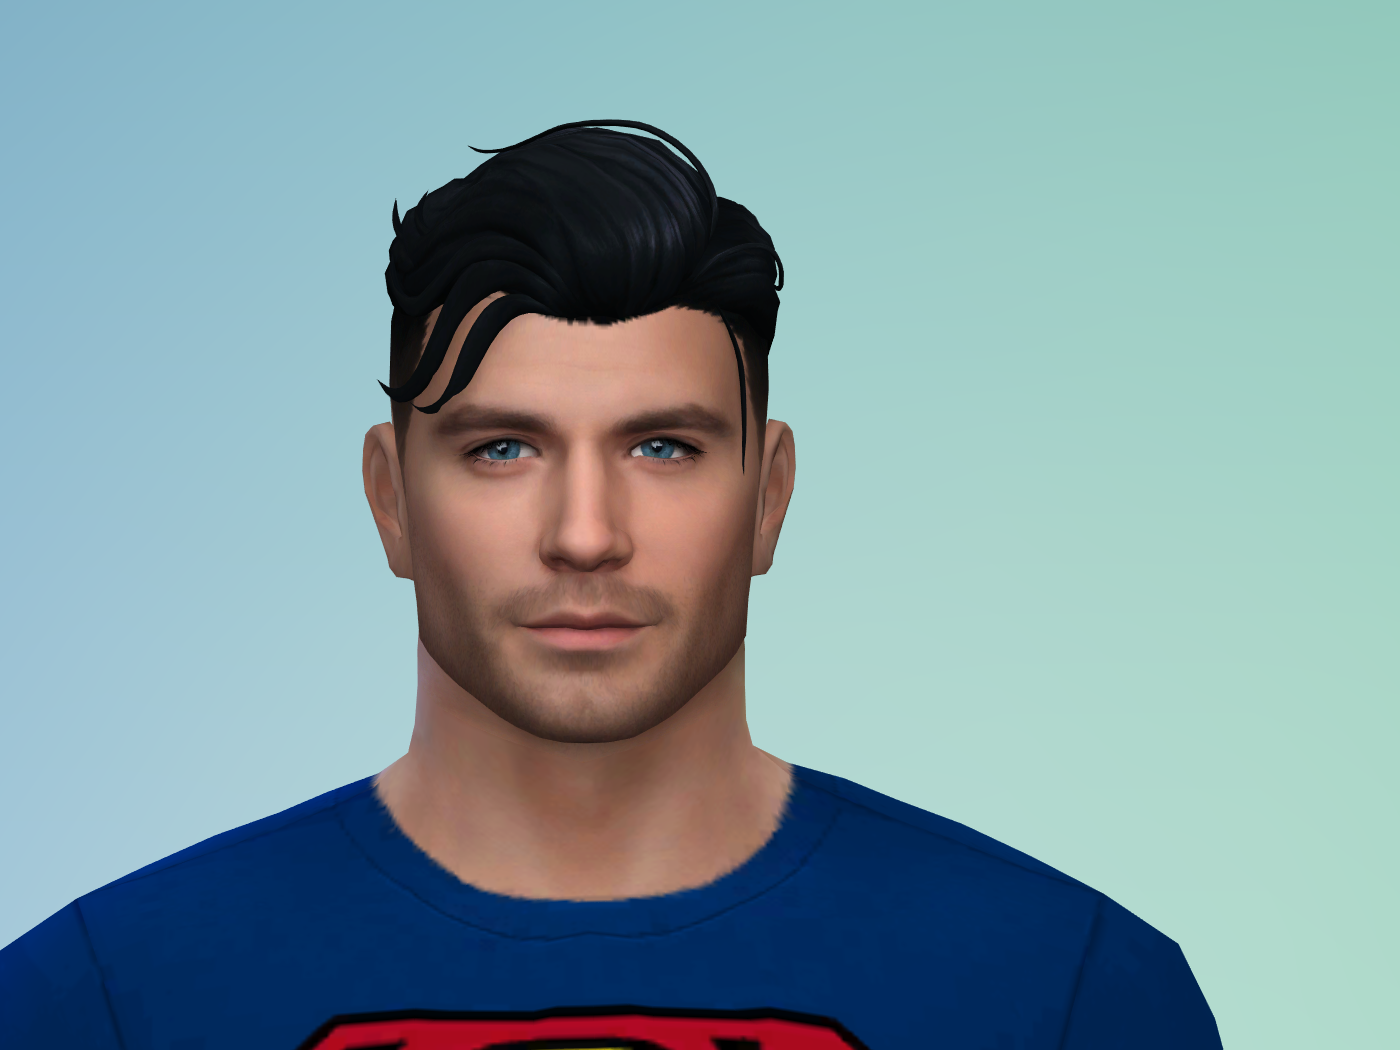 Share Your Male Sims! - Page 206 - The Sims 4 General Discussion ...